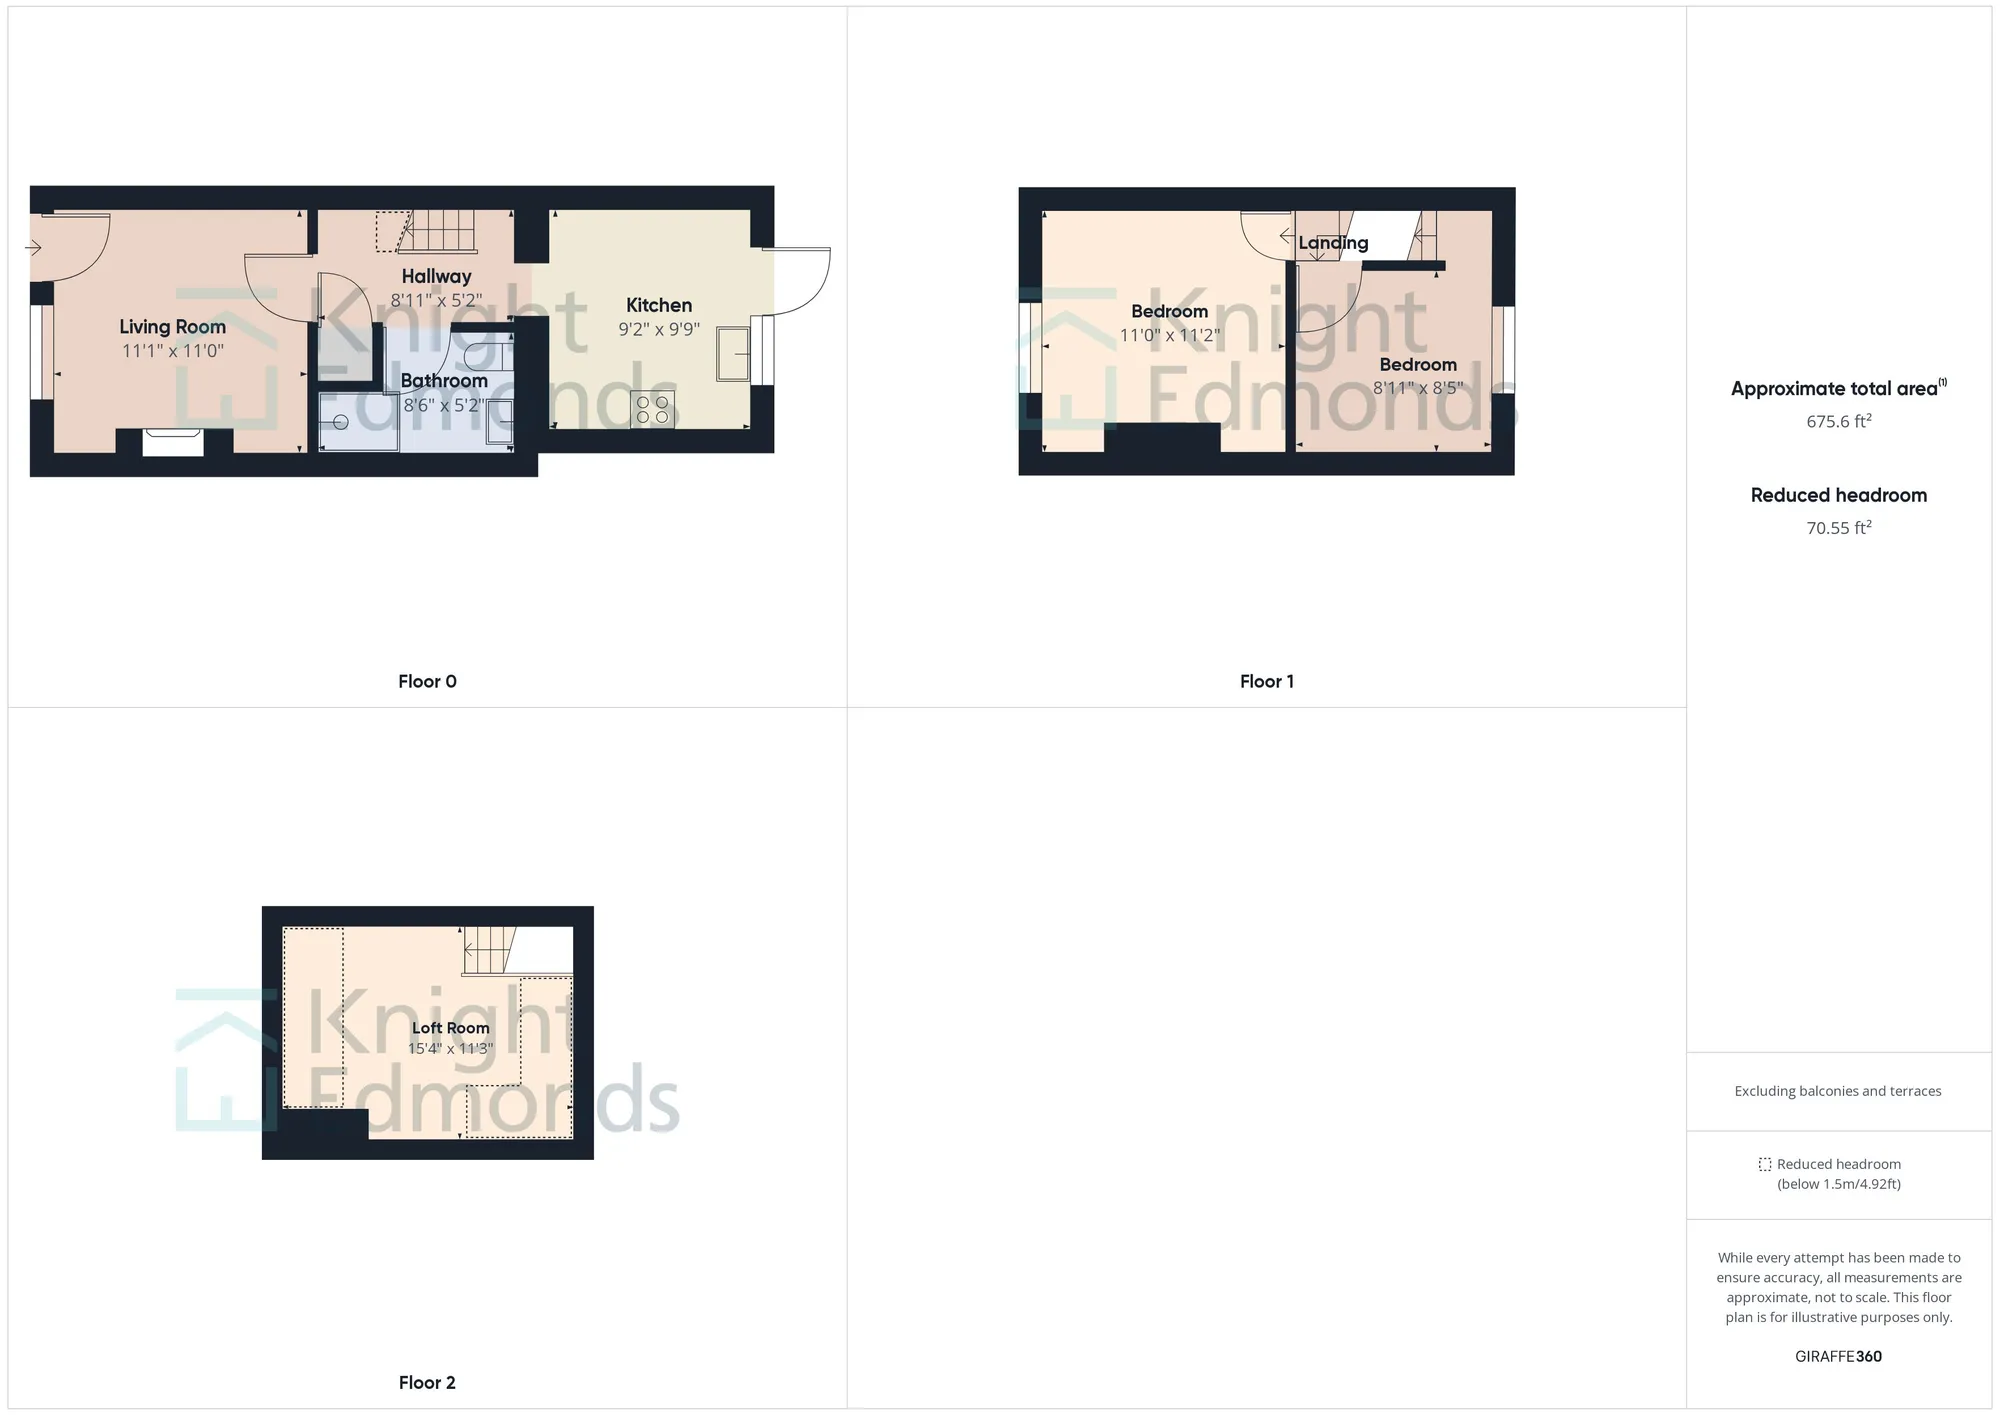 2 bed mid-terraced house for sale in Forge Lane, Maidstone - Property floorplan